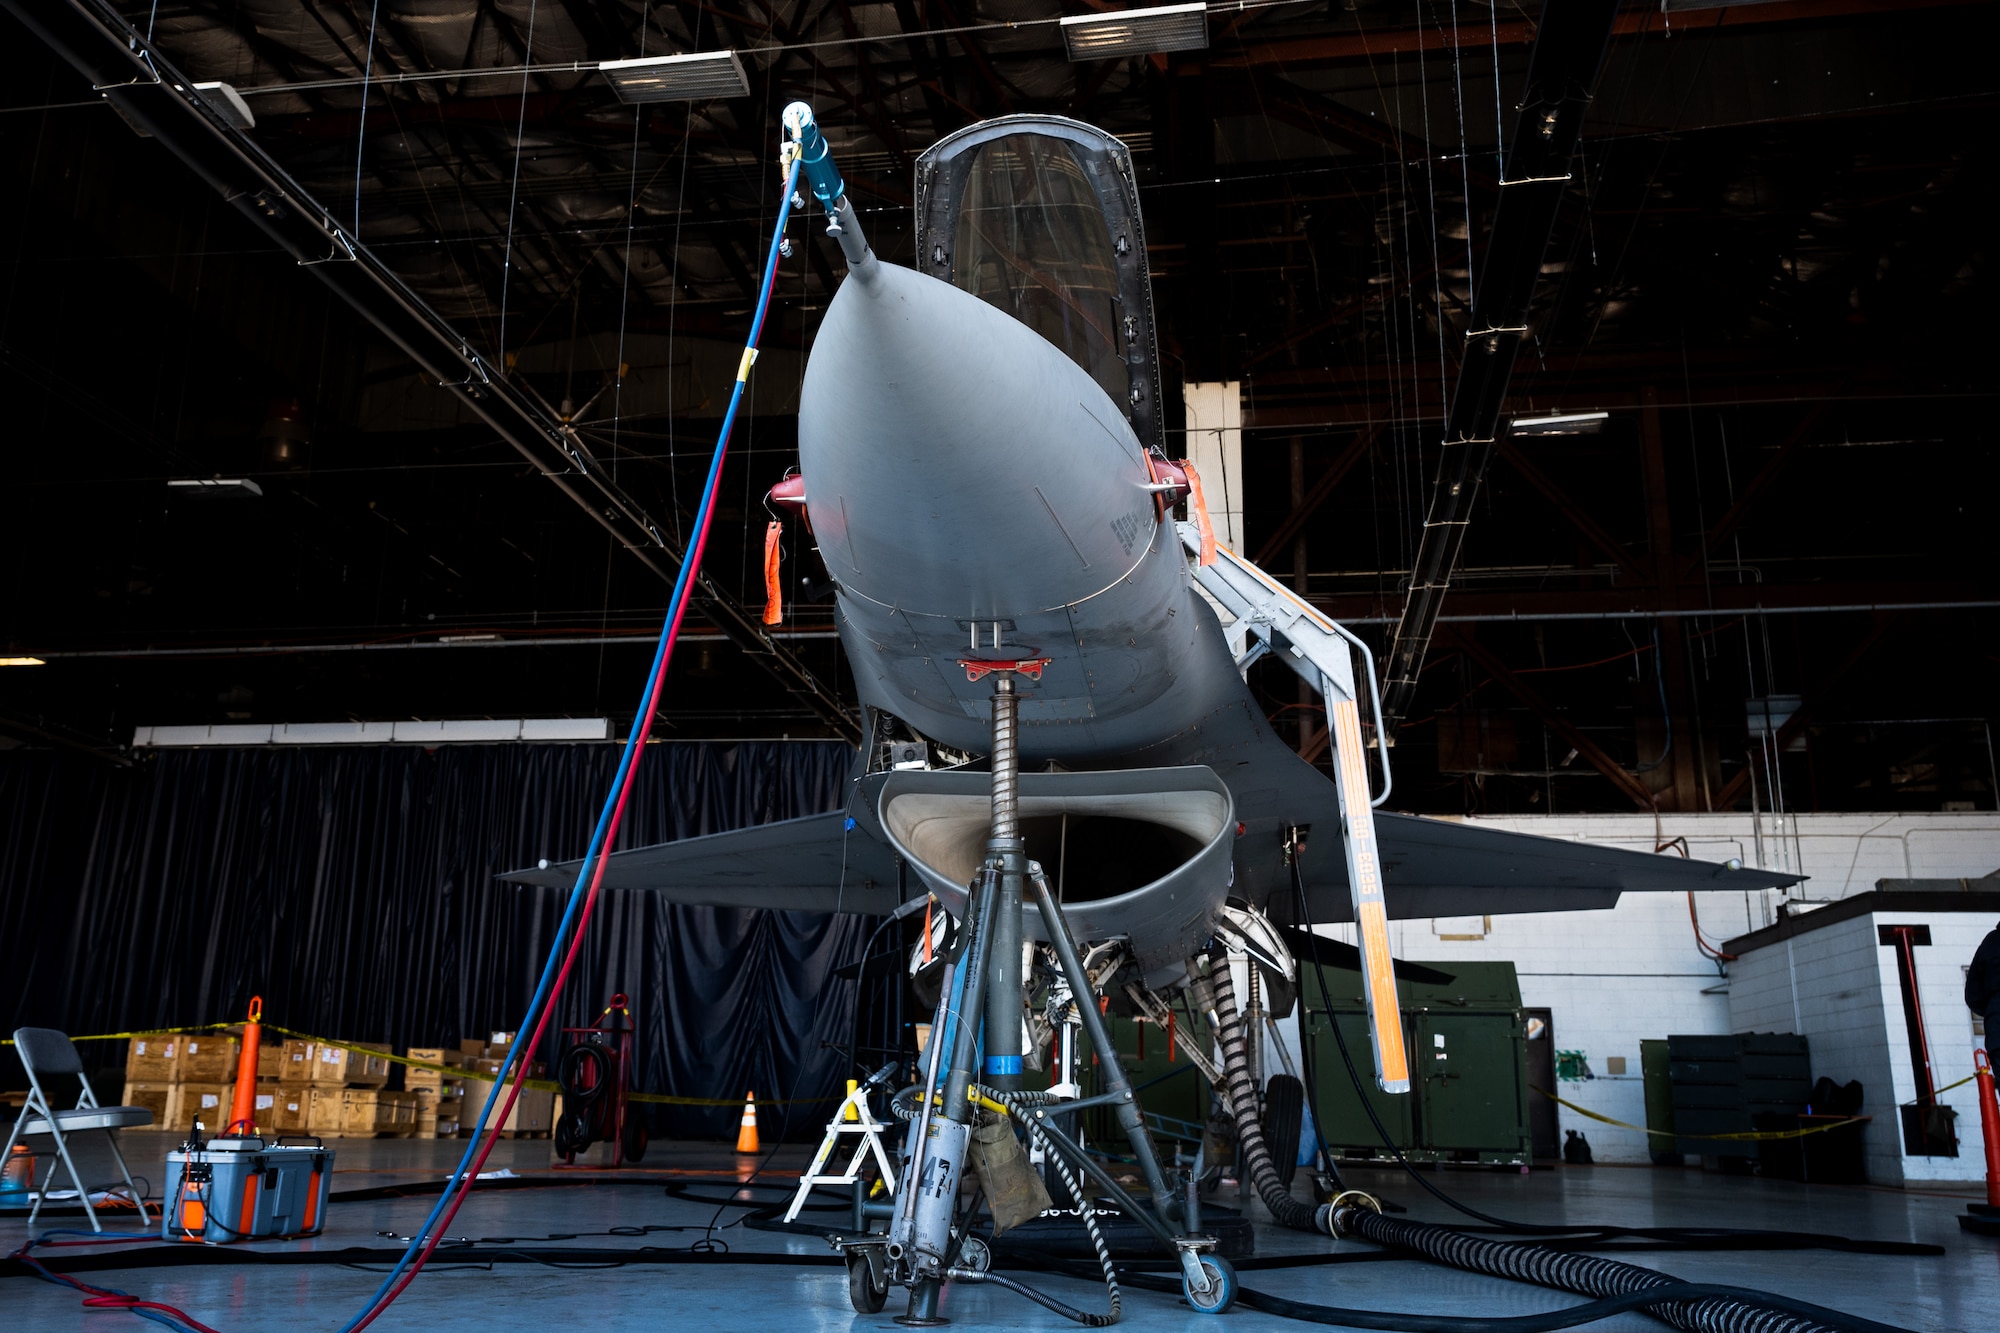 A U.S. Air Force F-16C Fighting Falcon assigned to the 20th Fighter Wing receives 22 radar modification upgrades in conjuction with the U.S. Air Force Service Life Extension Program at Shaw Air Force Base, S.C., April 19, 2023. These upgrades replaced the APG-68 radar with the new APG-83 Scalable Agile Beam Radar, allowing 20th Fighter Wing F-16s to detect air-to-air and air-to-ground threats at much longer ranges. (U.S. Air Force photo by Airman 1st Class Erin Stanley)